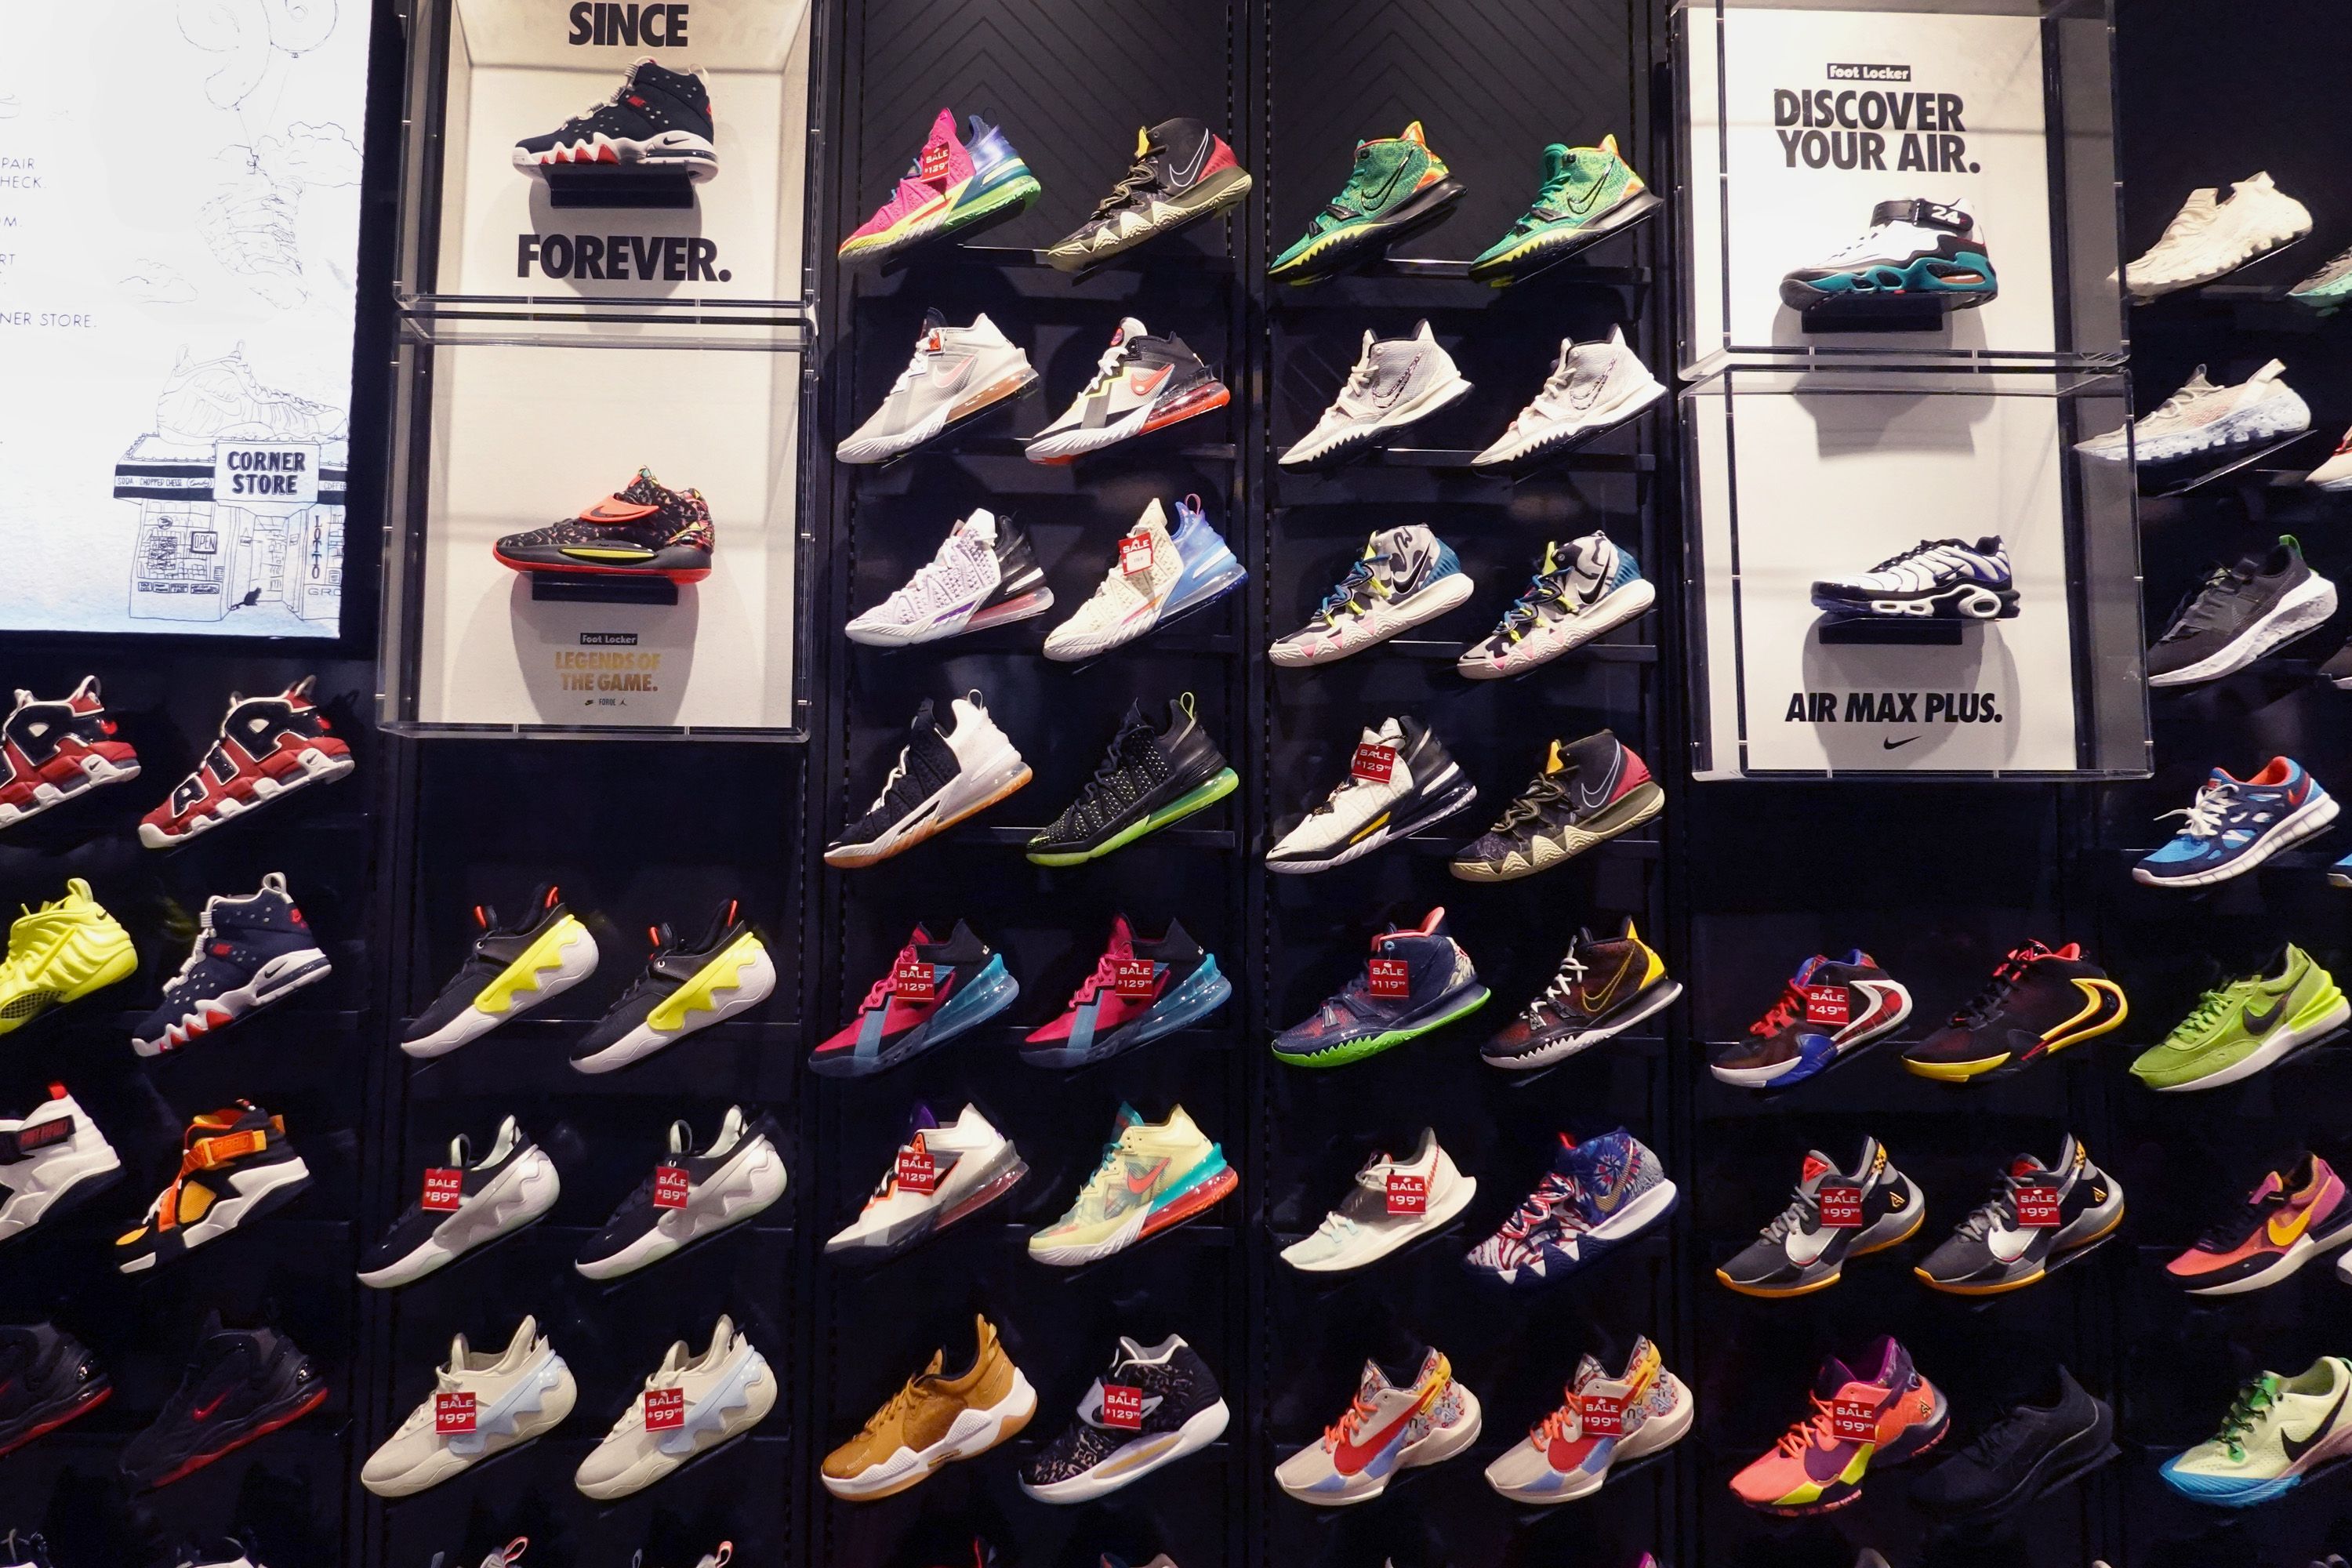 Foot Locker plans to expand customer base “off mall” with recent acquisitions